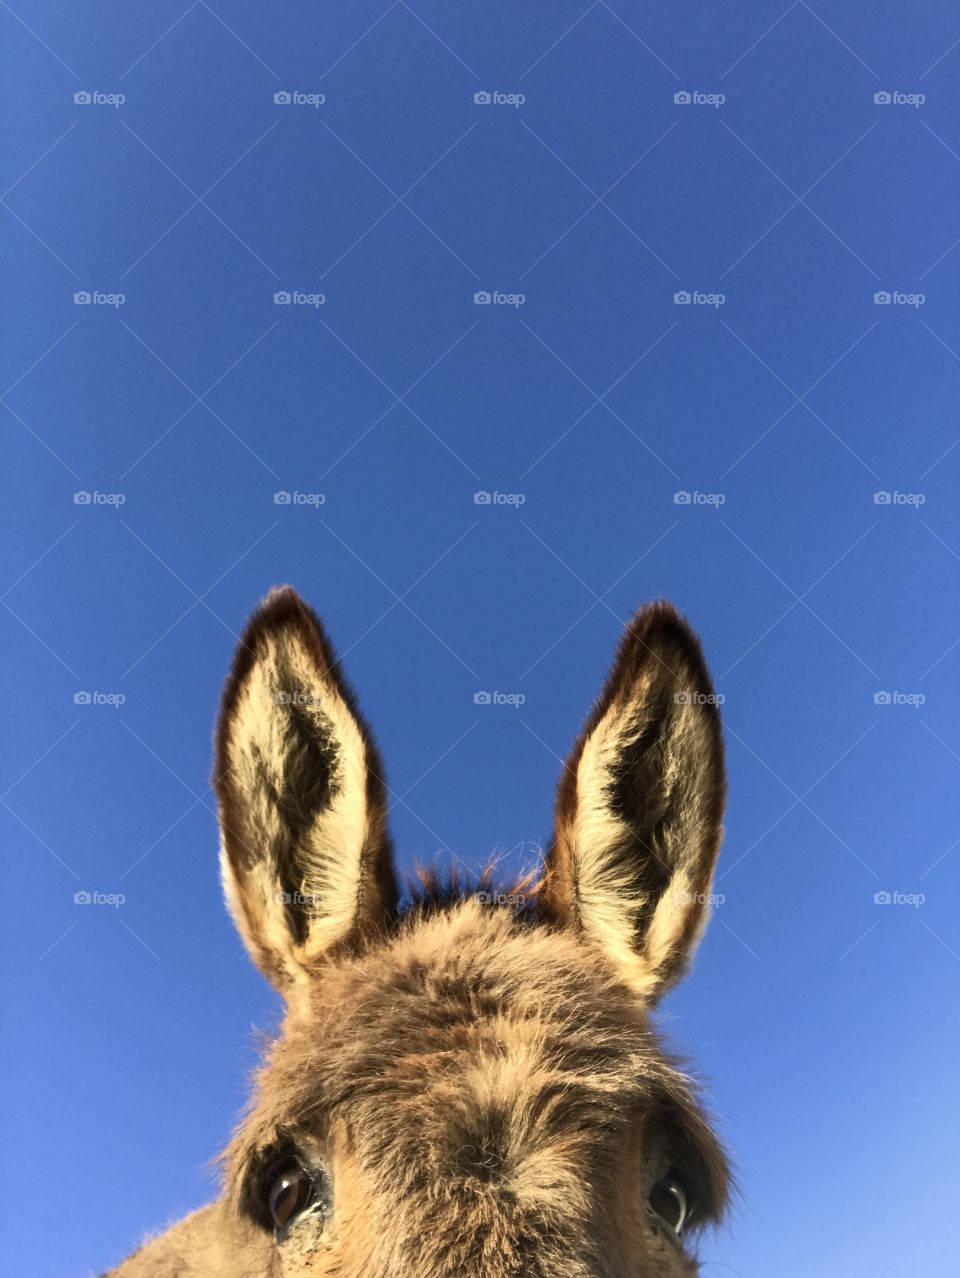 Donkey ears with blue skies!